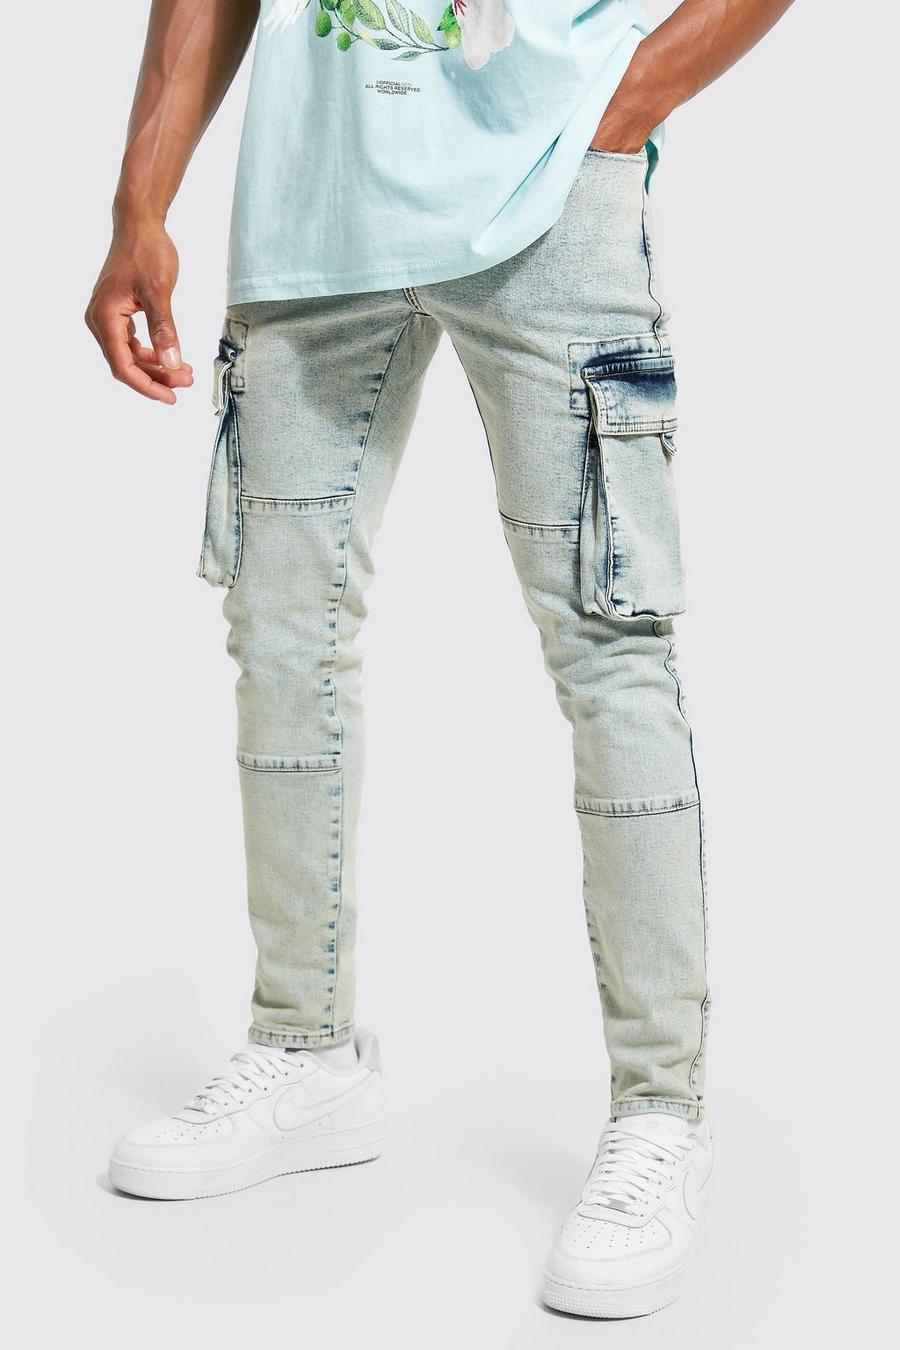 Blue Womens Mens Clothing Mens Jeans Skinny jeans Boohoo Denim Skinny Stretch 3d Pocket Cargo Jeans in Ice Blue 